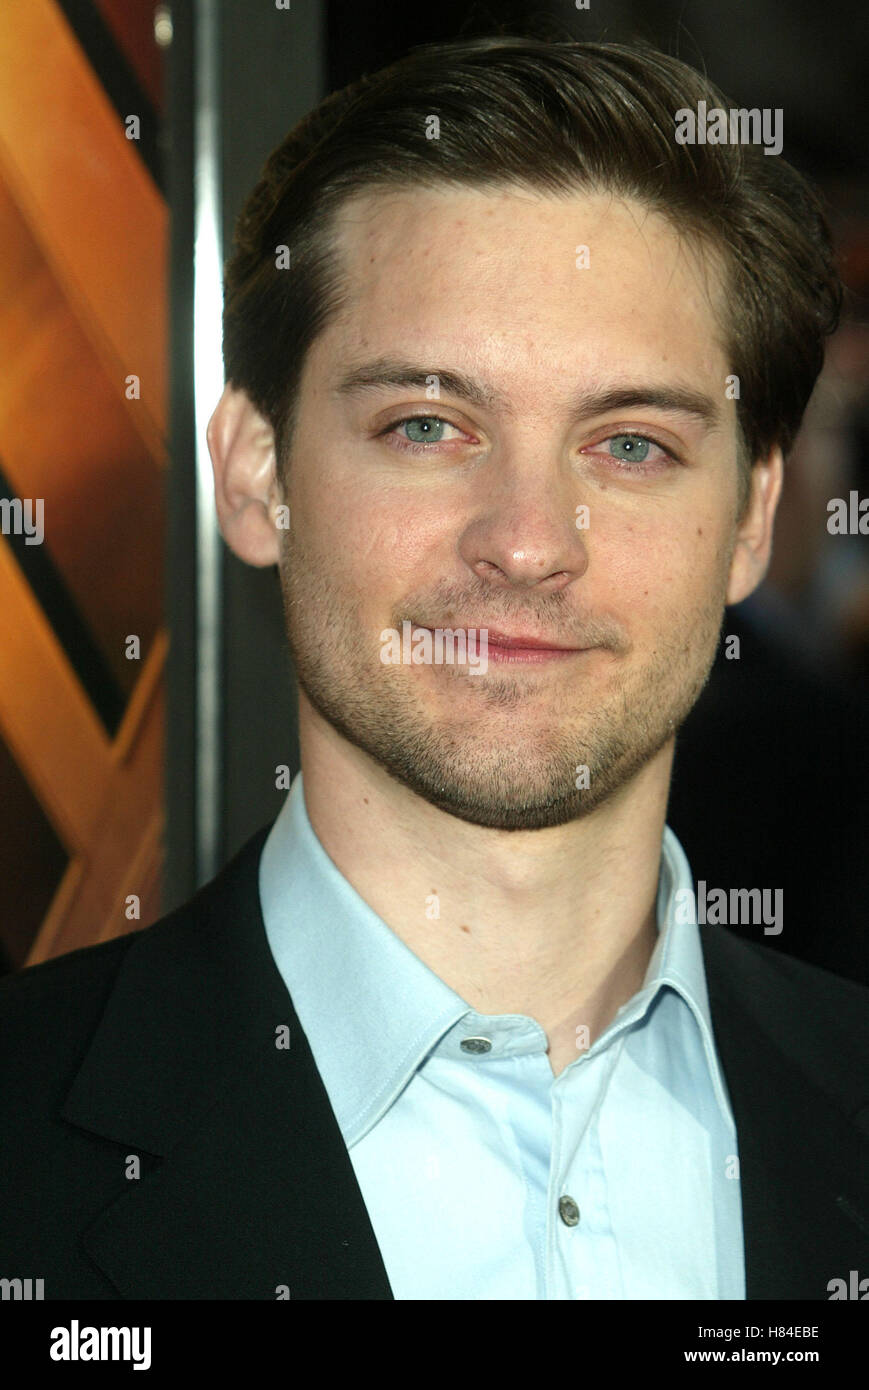 TOBEY MAGUIRE SPIDER-MAN FILM PREMIERE WESTWOOD LOS ANGELES USA 29 April 2002 Stock Photo